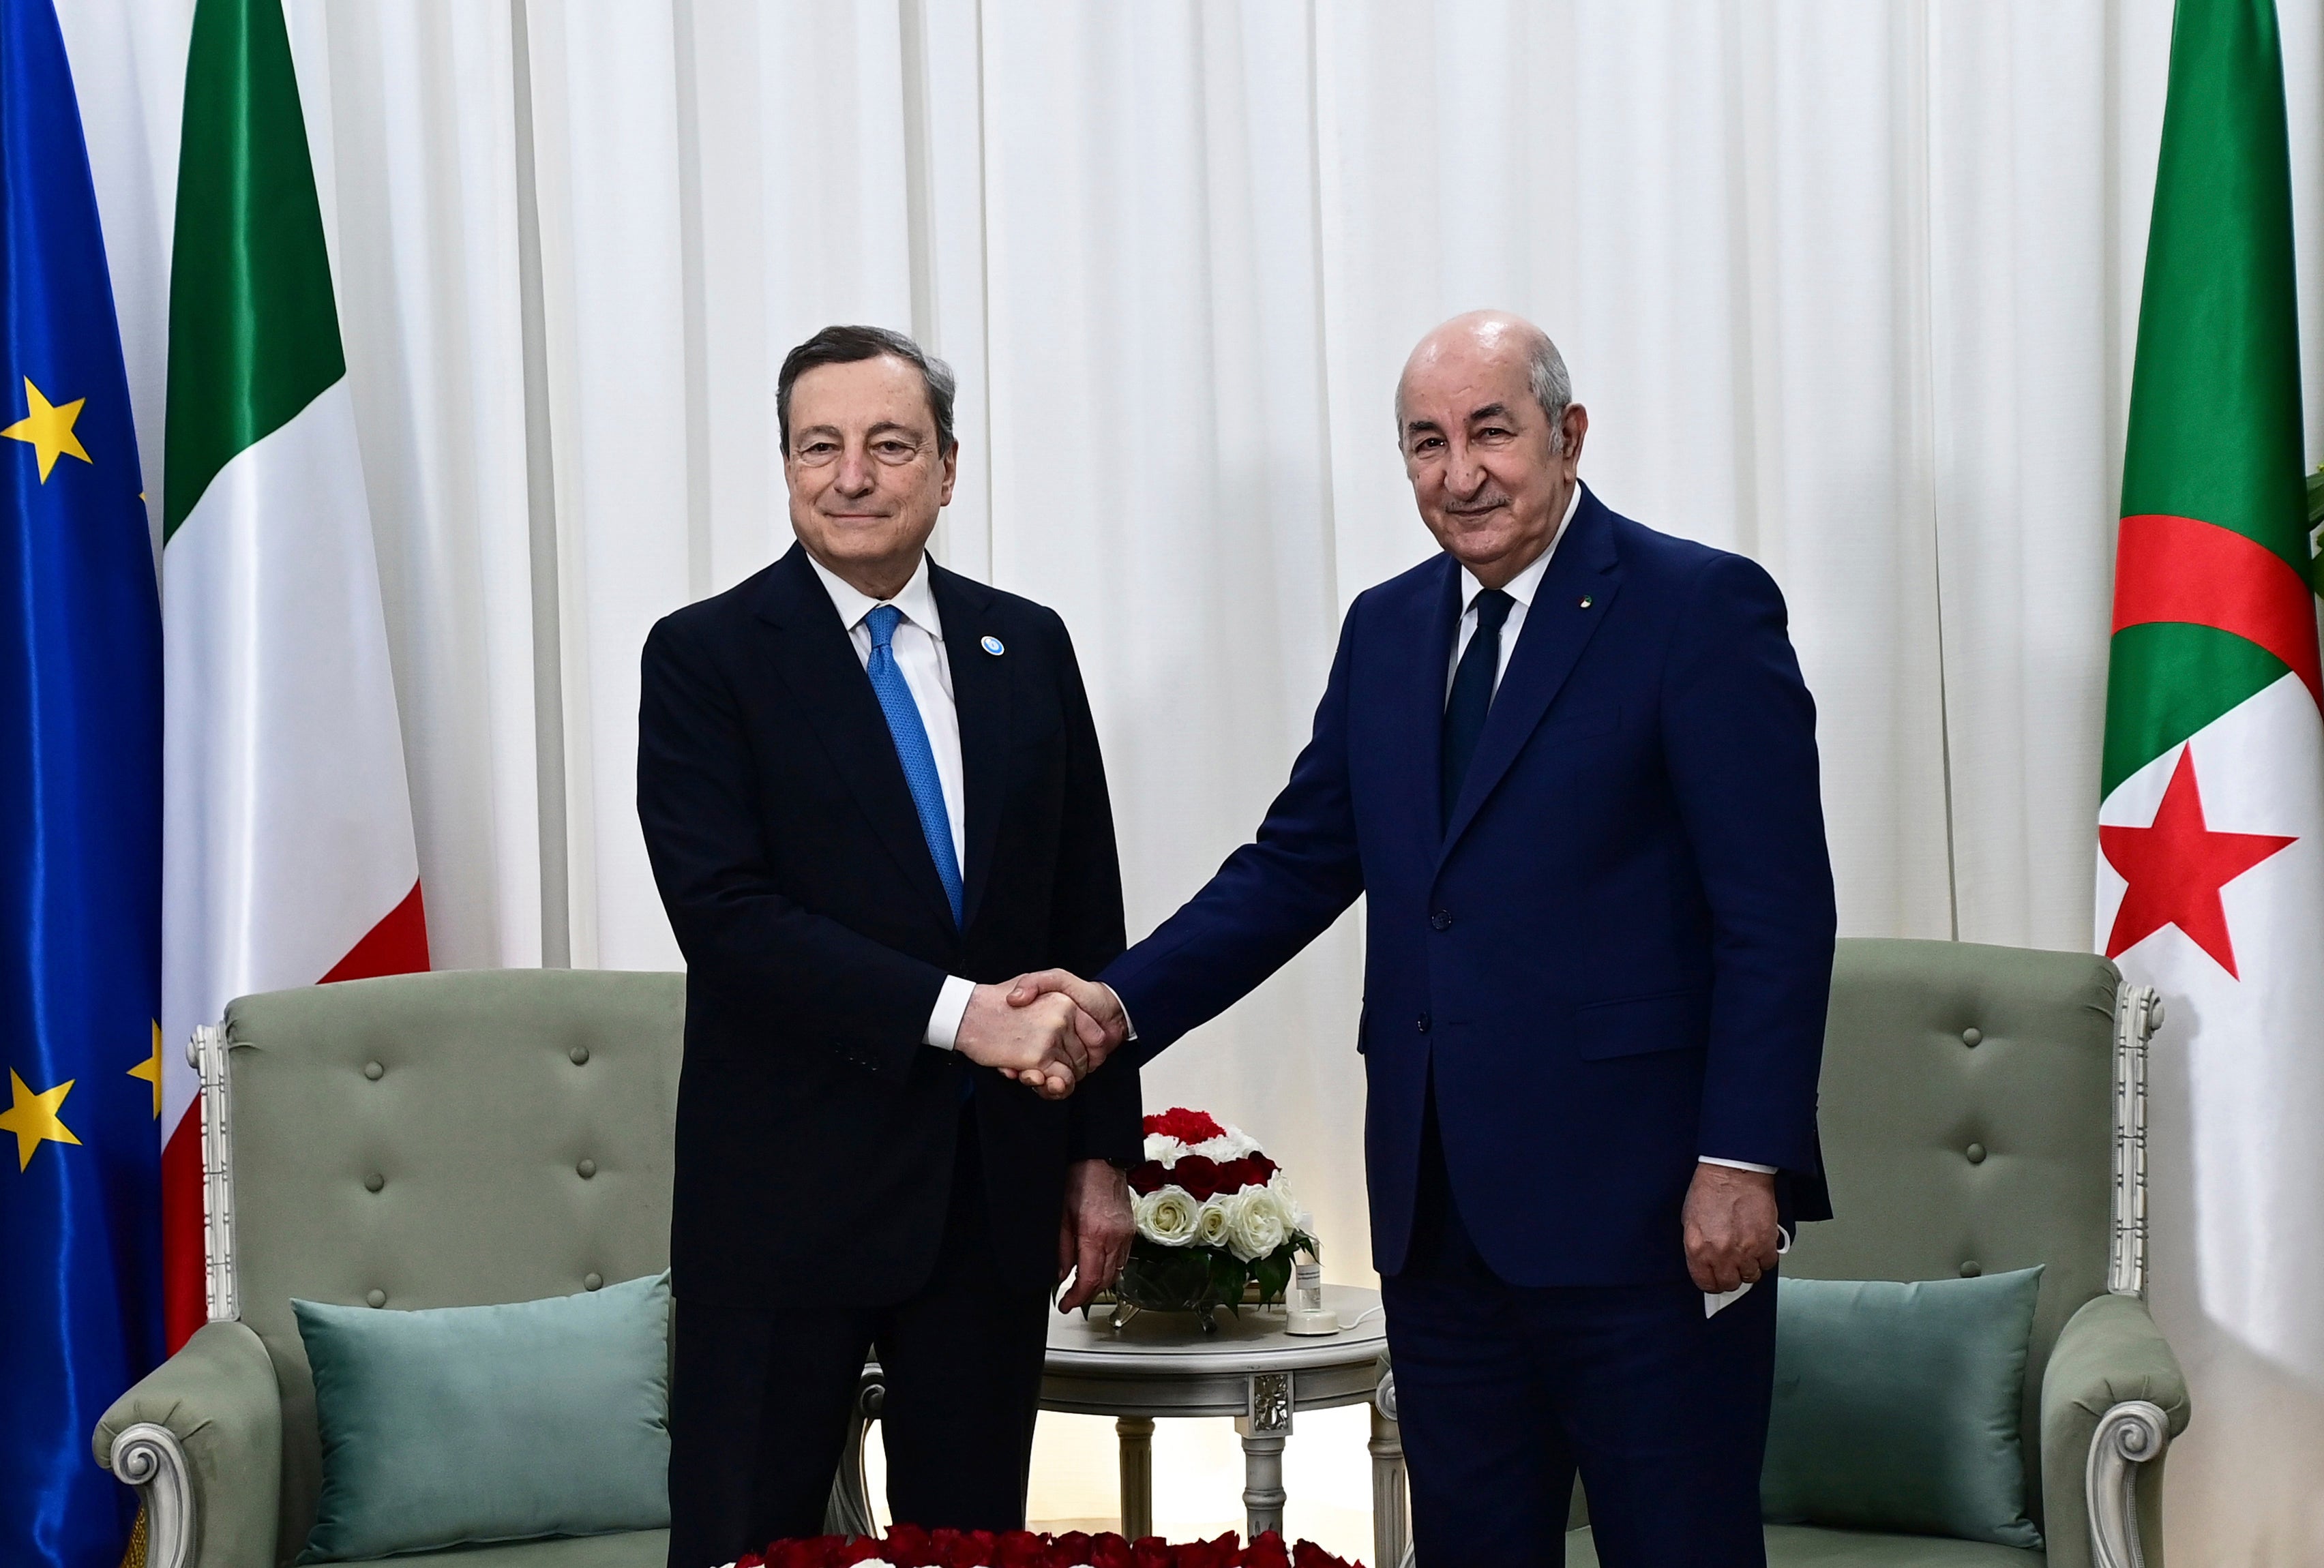 Algerian president Abdelmadjid Tebboune (right) shakes hands with Italian prime minister Mario Draghi in Algiers this week